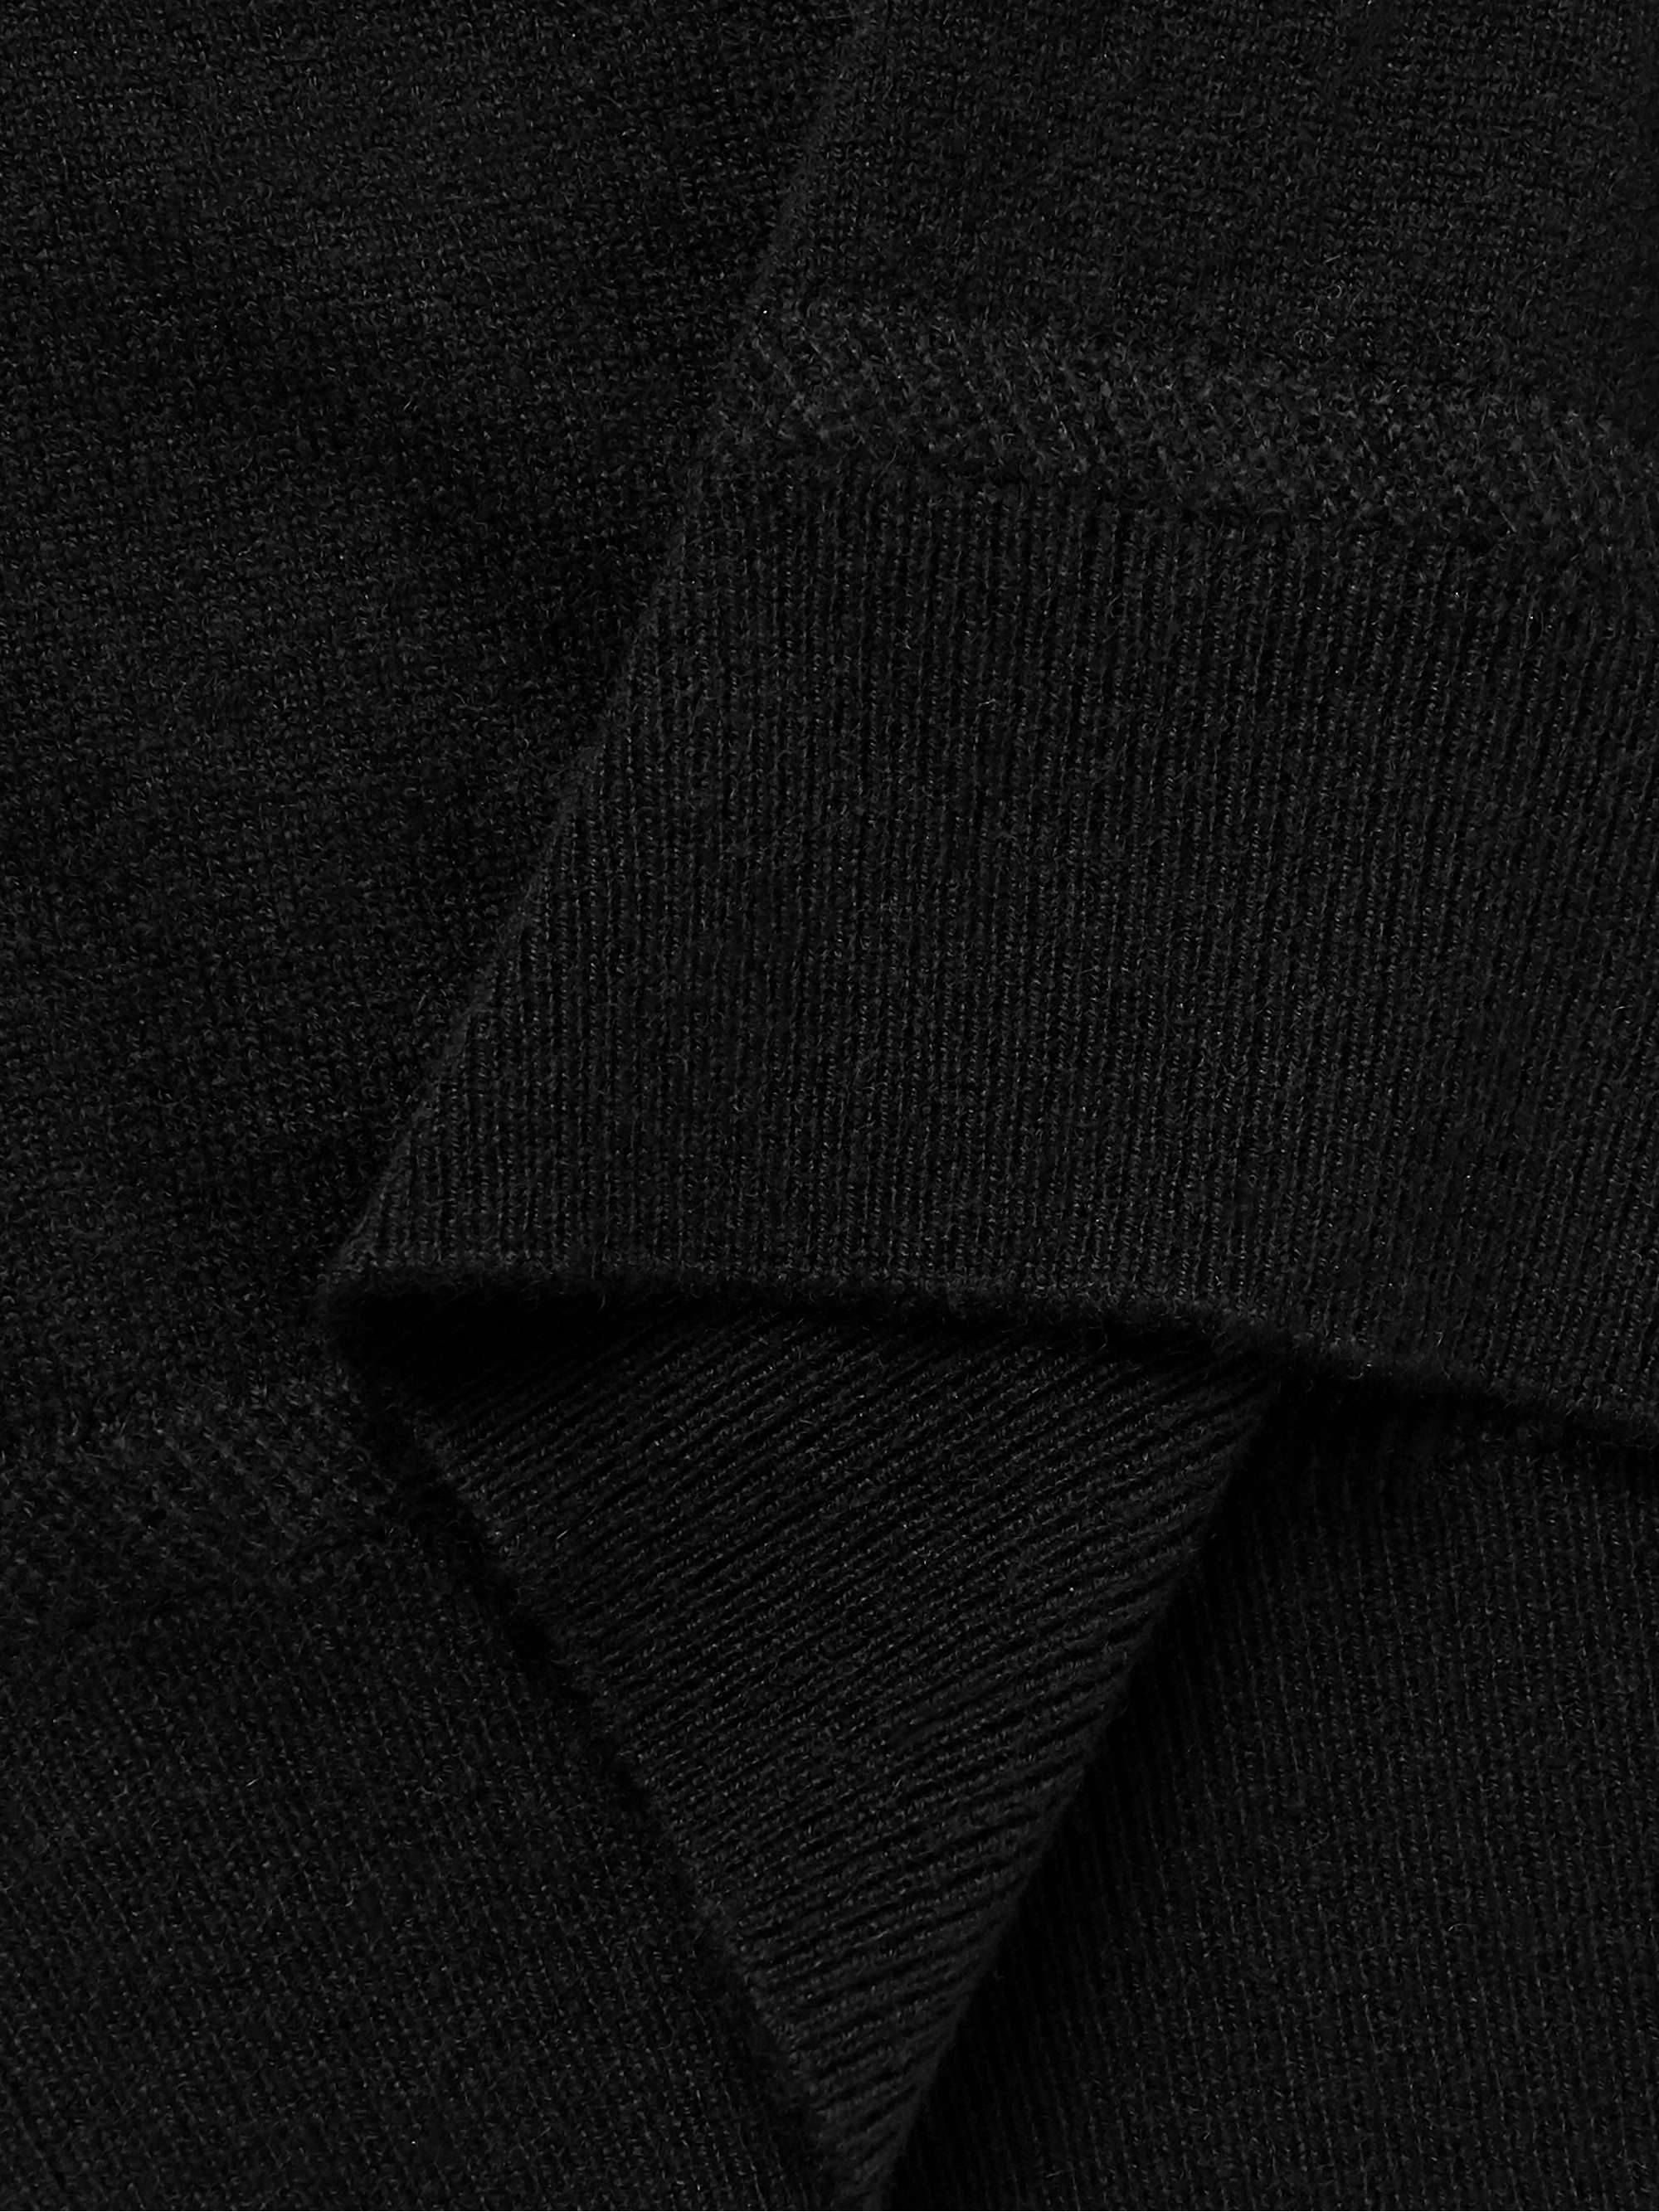 TOM FORD Slim-Fit Cashmere Sweater